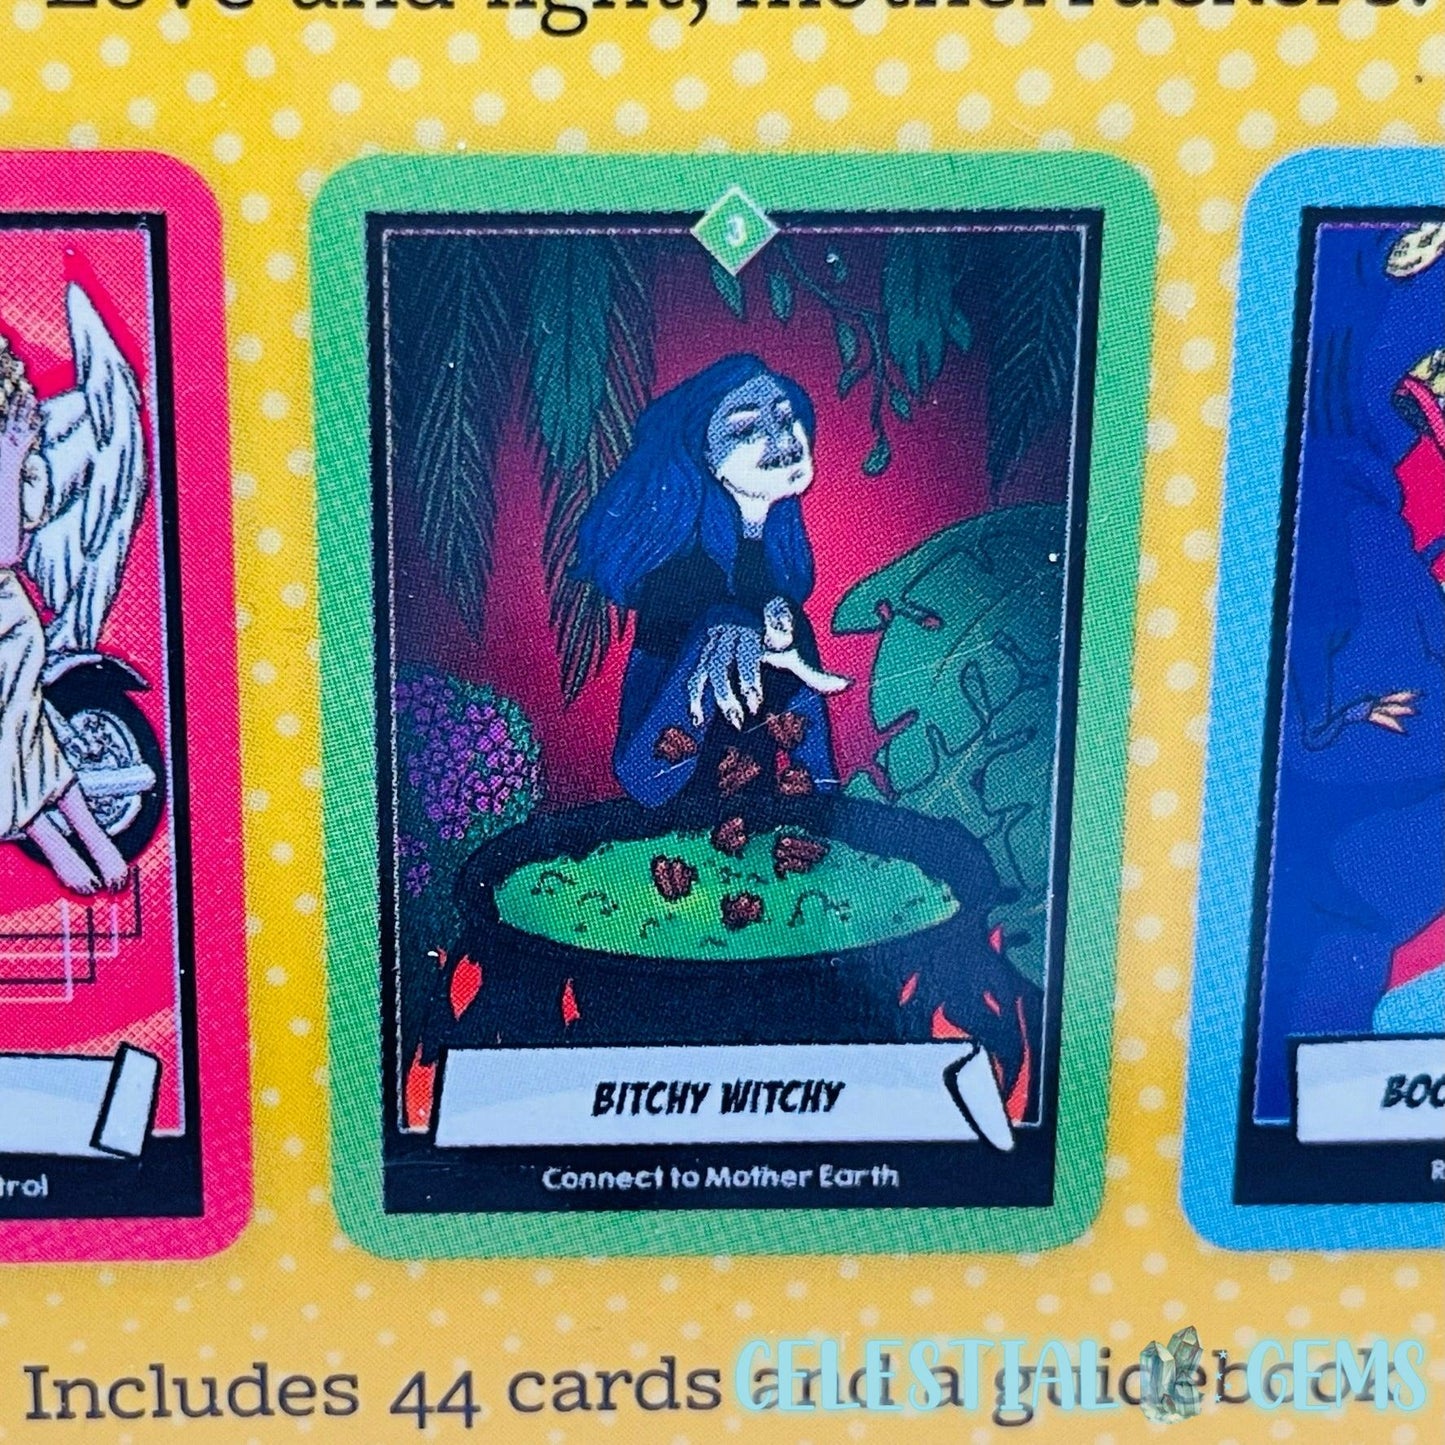 The Naughty Oracle Card Deck by Naomi Beth